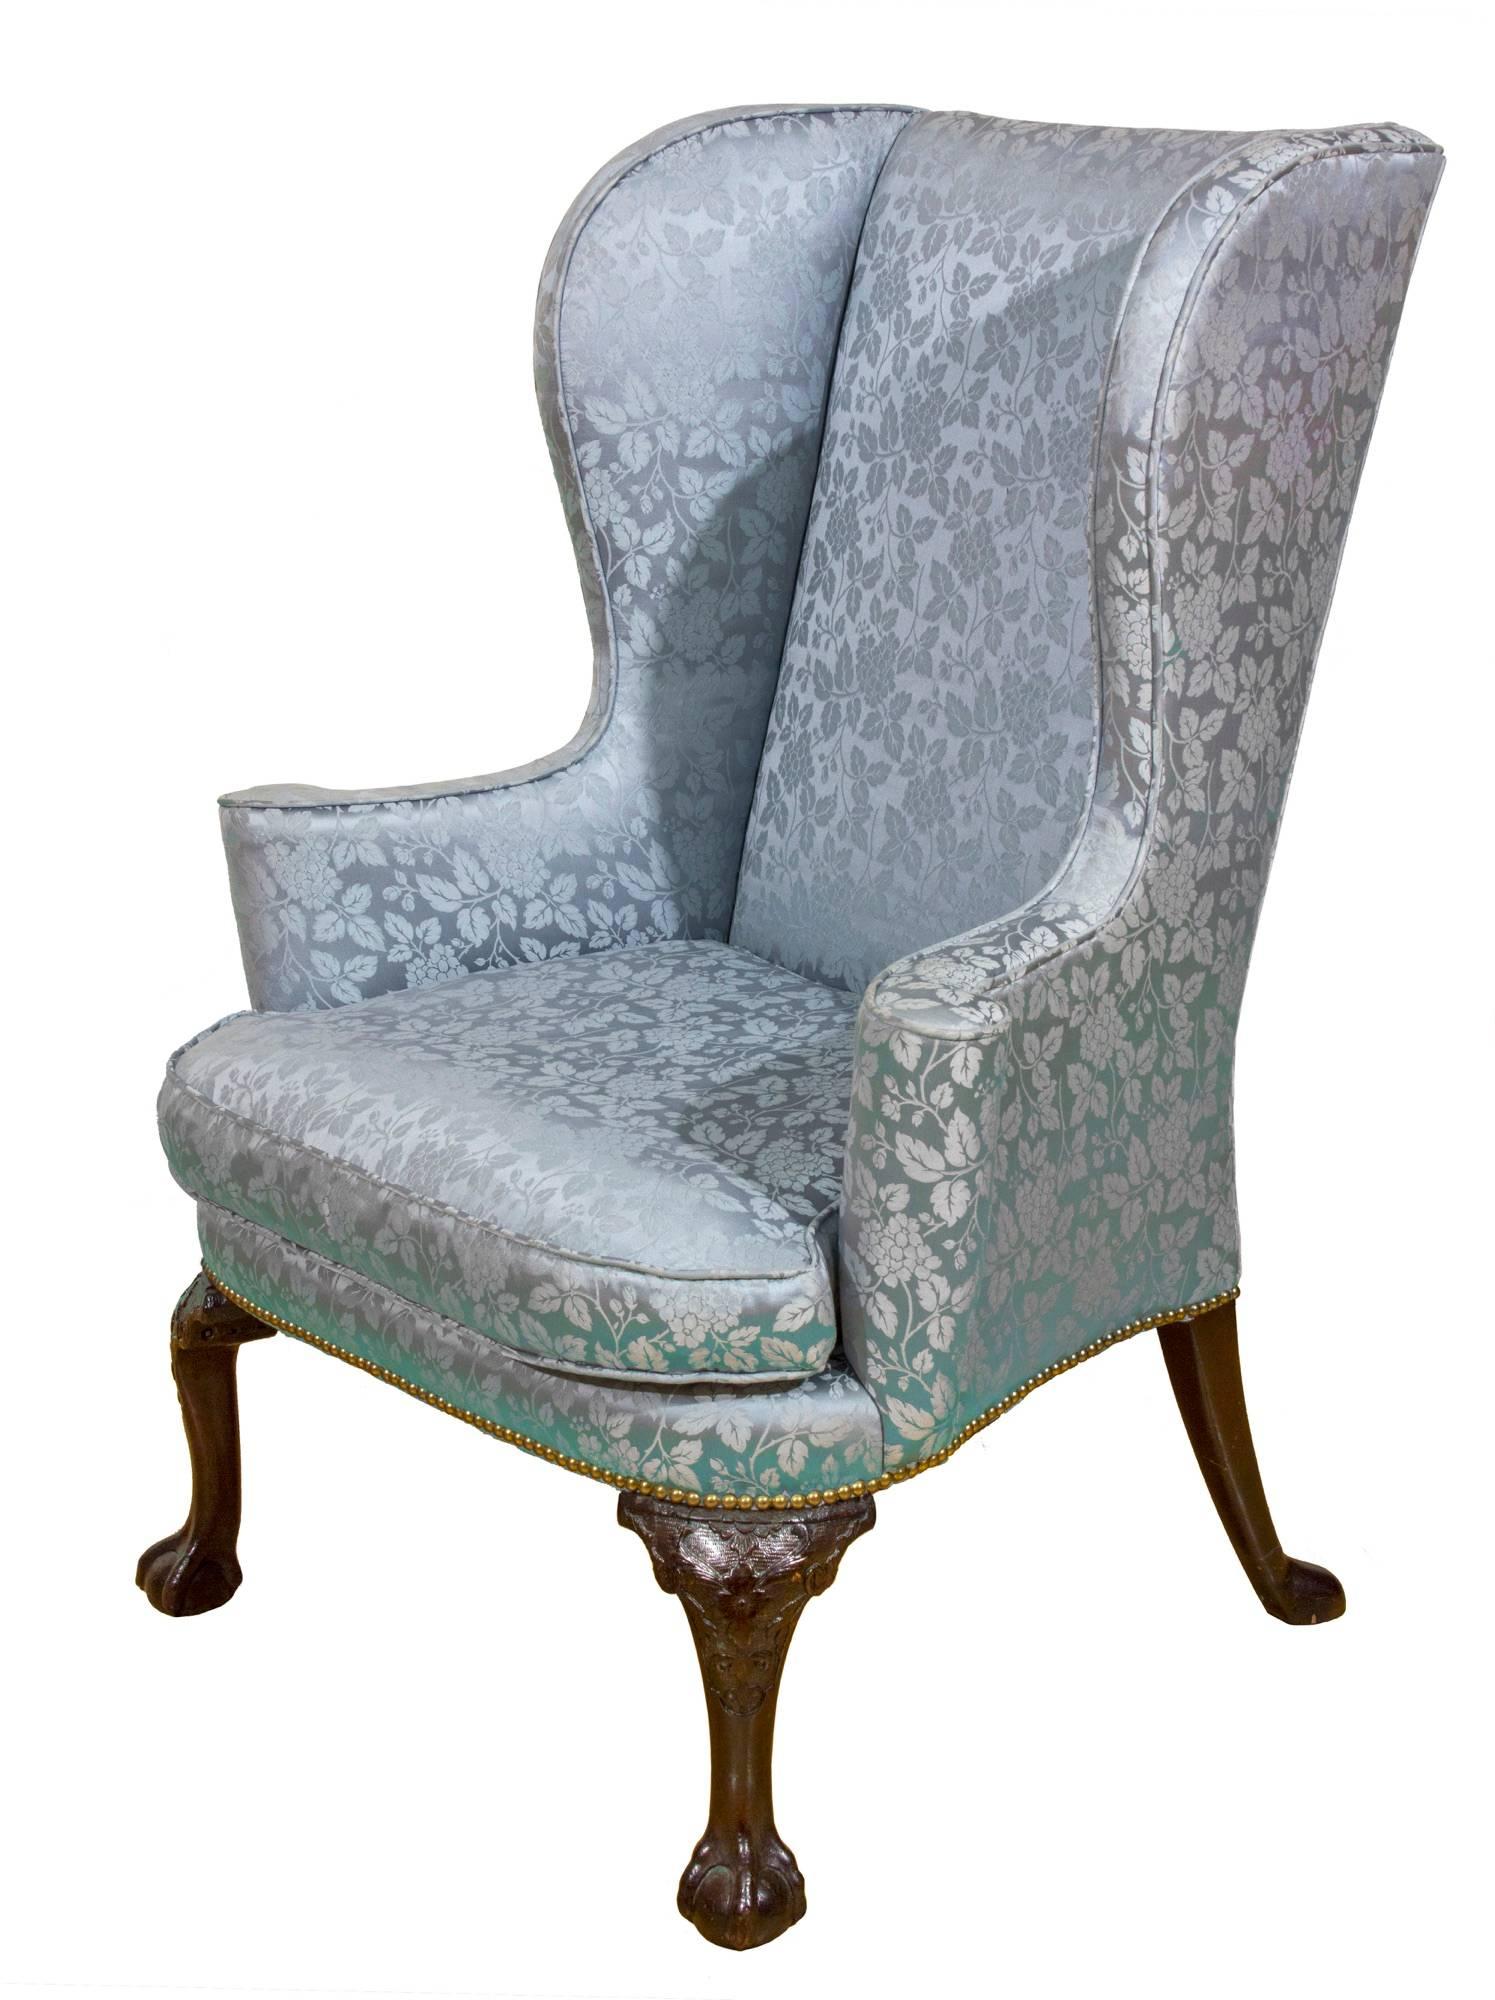 This is a delightful wing chair; neither too big nor too small, comforting, and is sophisticated with fine lines and a dramatically raked rear leg. 

Interestingly, the back of this chair does not run straight across but is slightly bowed back,